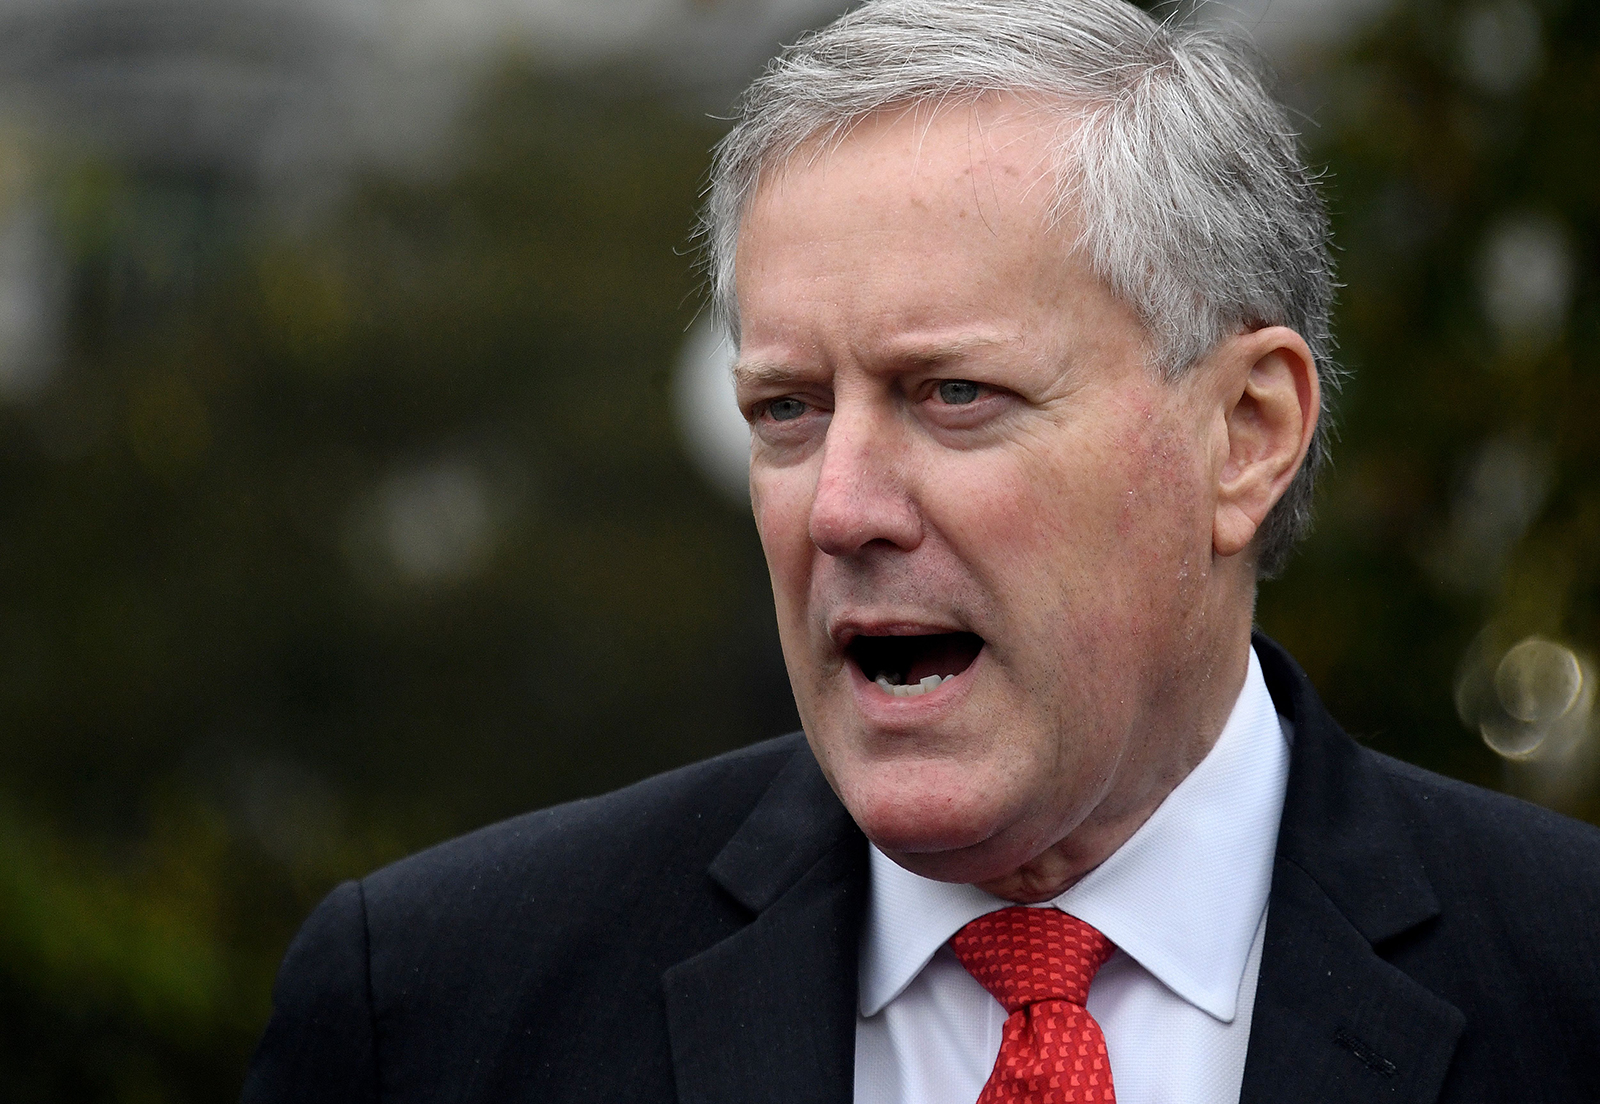 Former White House Chief of Staff Mark Meadows speaks to the media at the White House in Washington, DC, October 21, 2020. (Olivier Douliery/AFP/Getty Images)